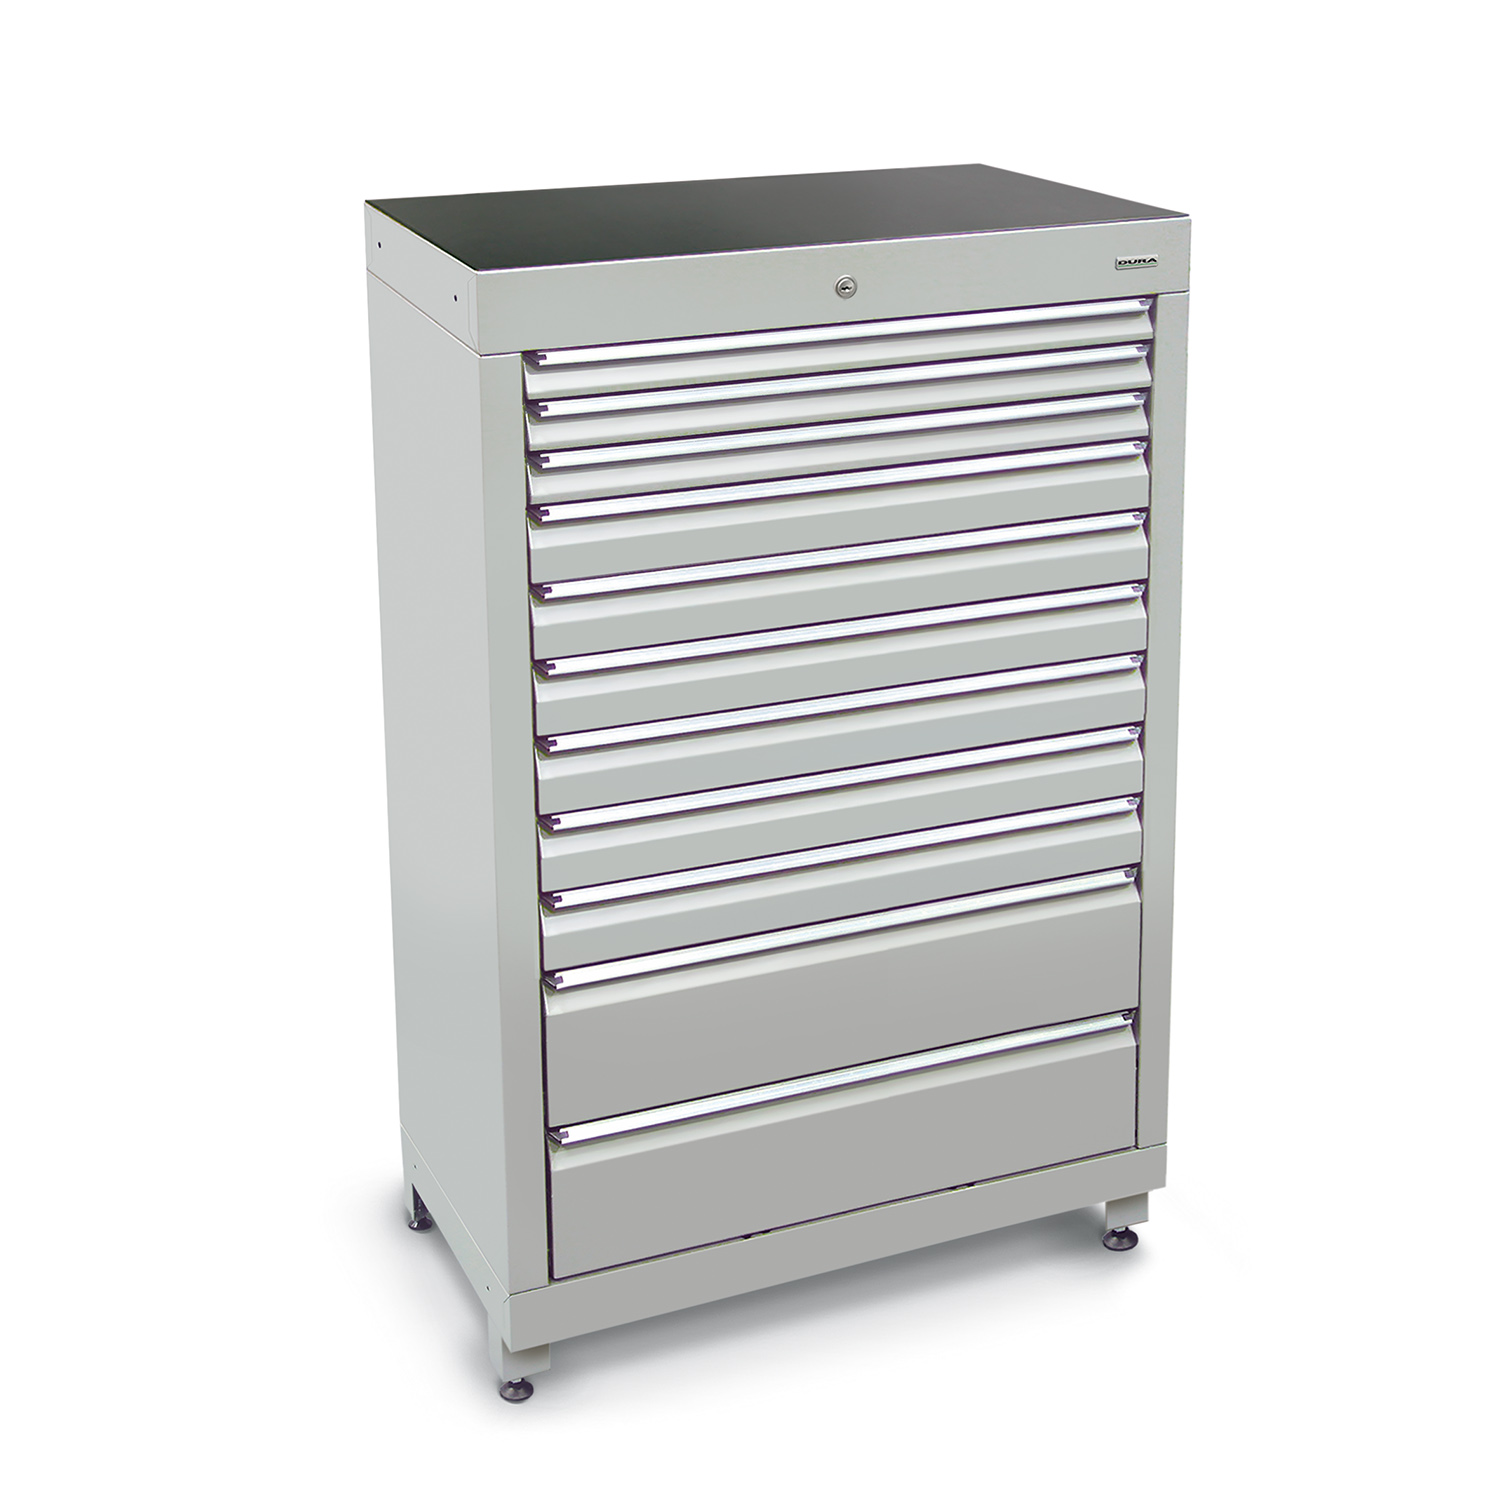 900mm Multi-drawer high tool cabinets with 11 drawers (3 slim, 6 medium, 2 large) and feet